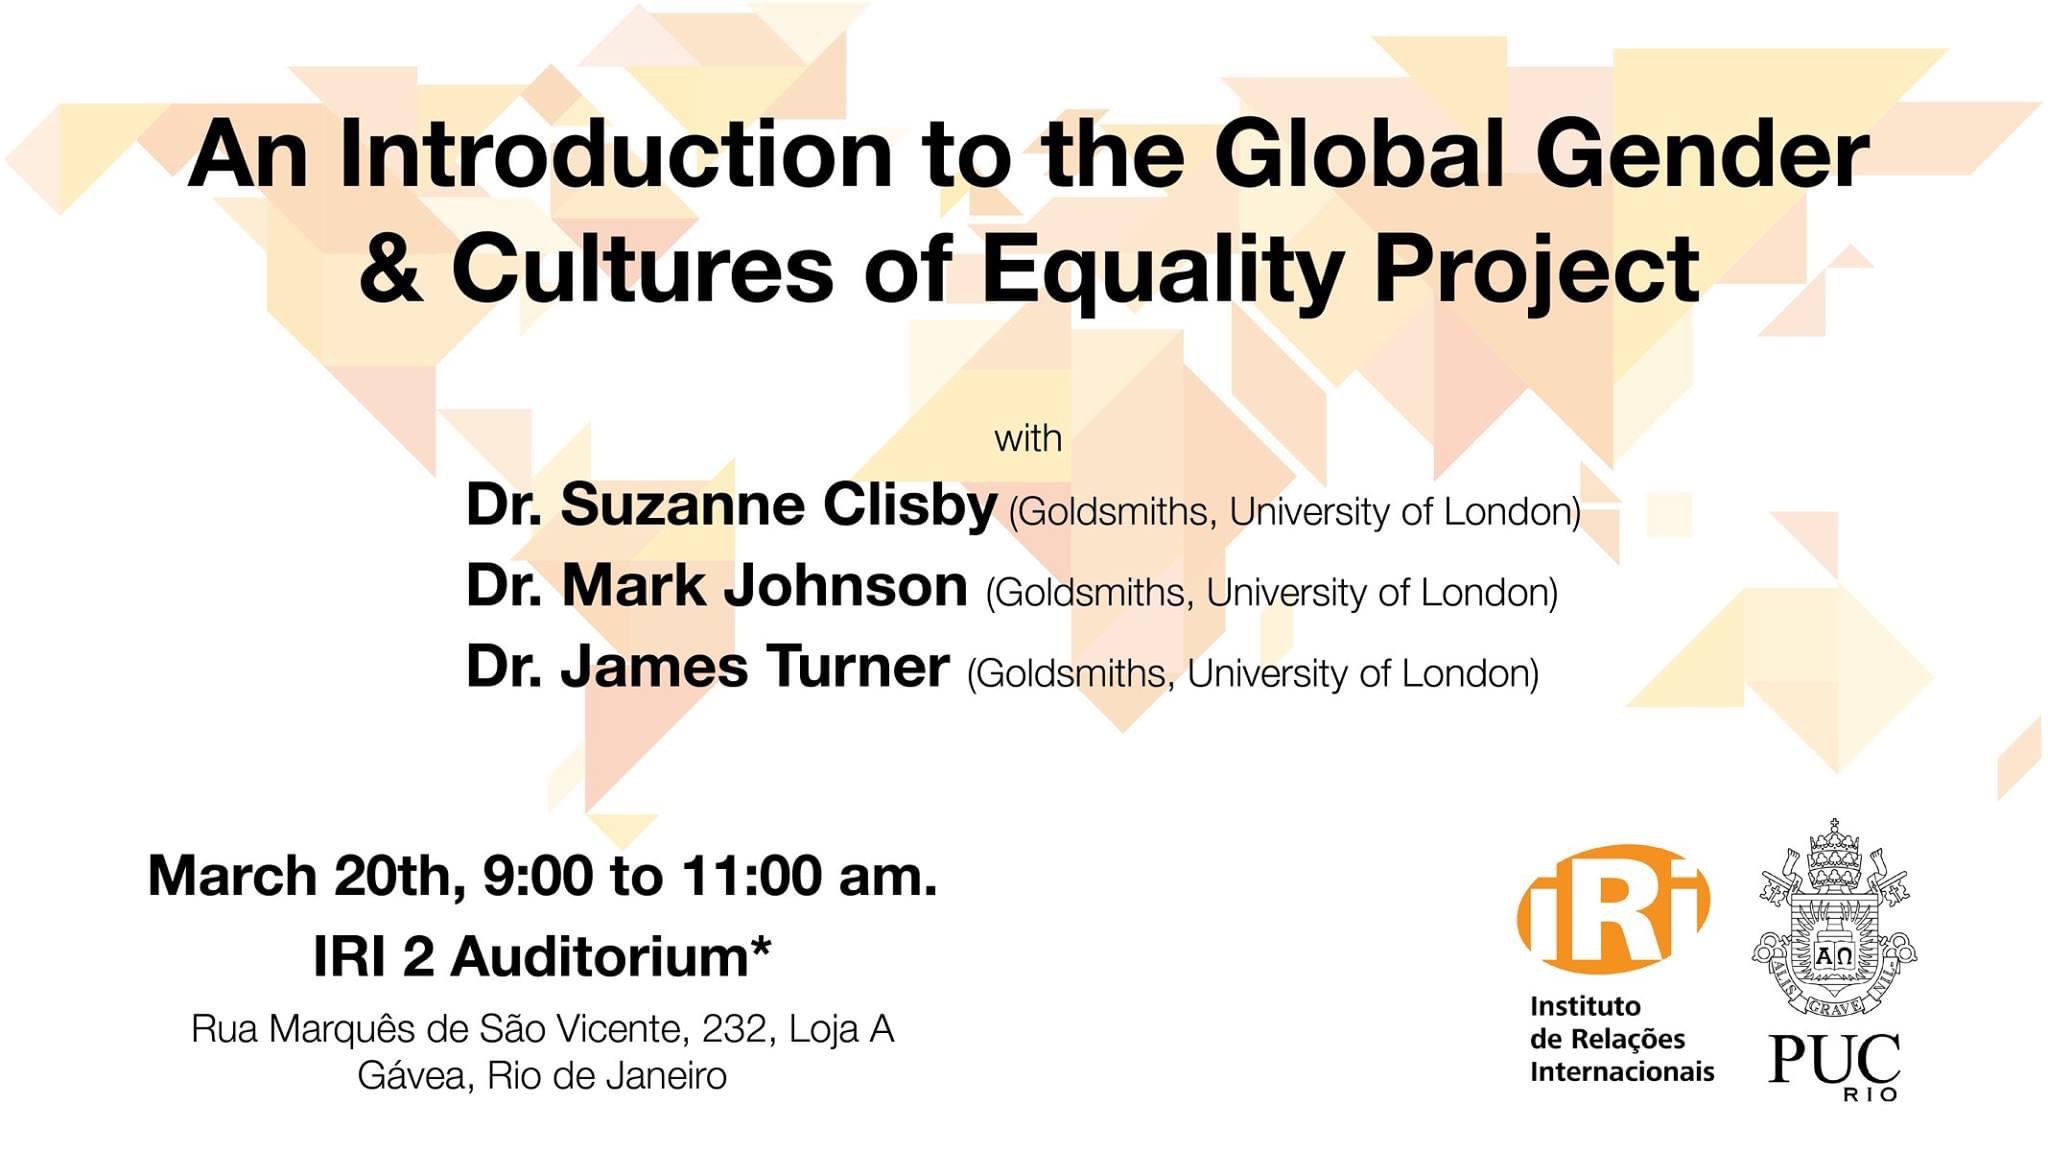 An Introduction to the Global Gender & Cultures of Equality Project